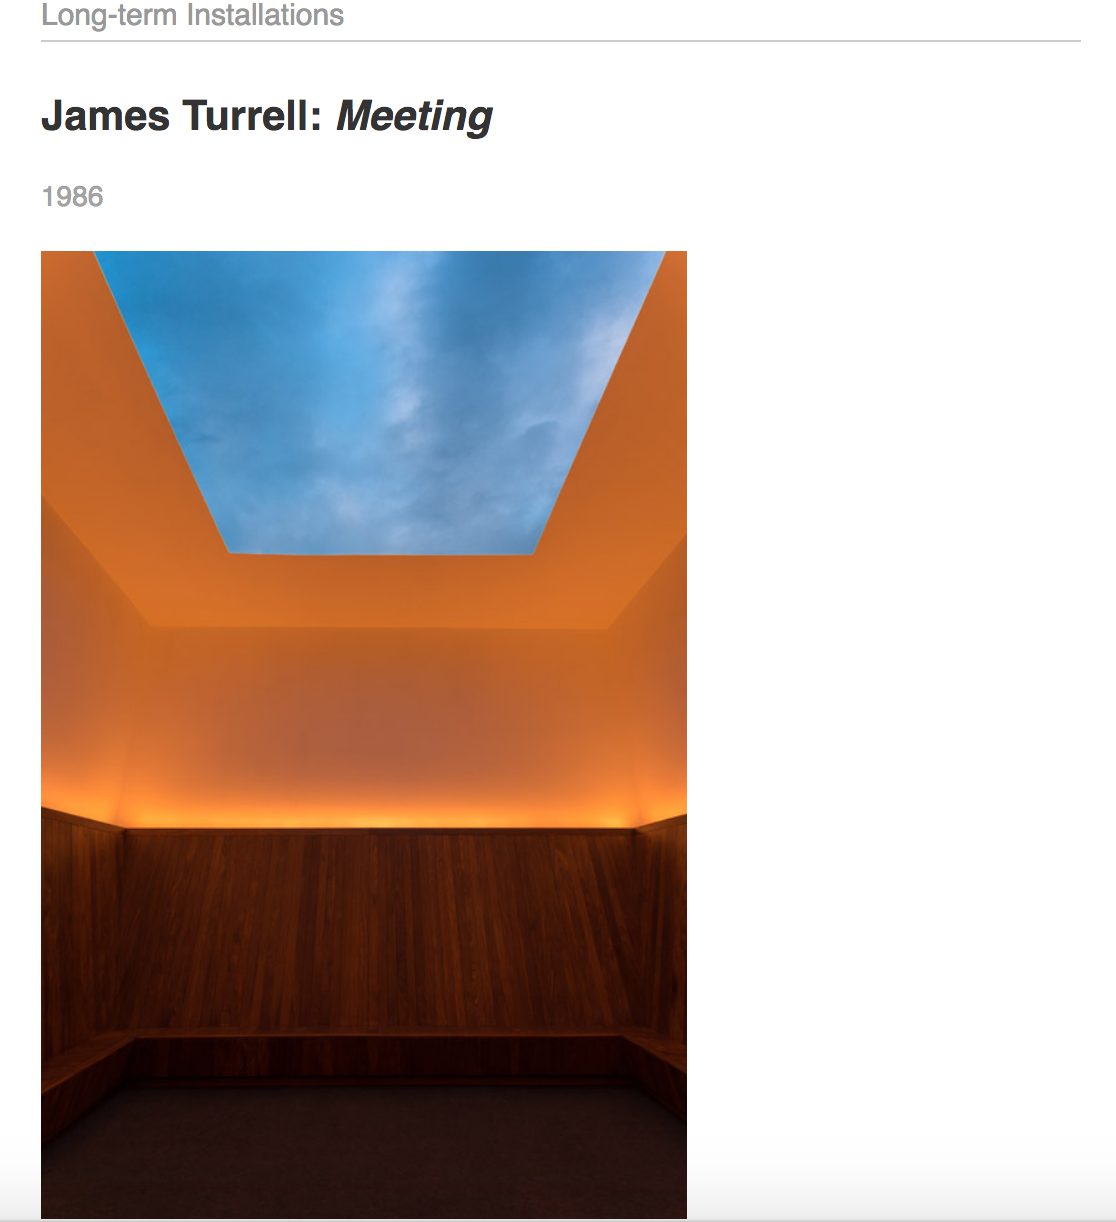 James Turrell: Passageways and my trip | by Echo in the Film | Medium